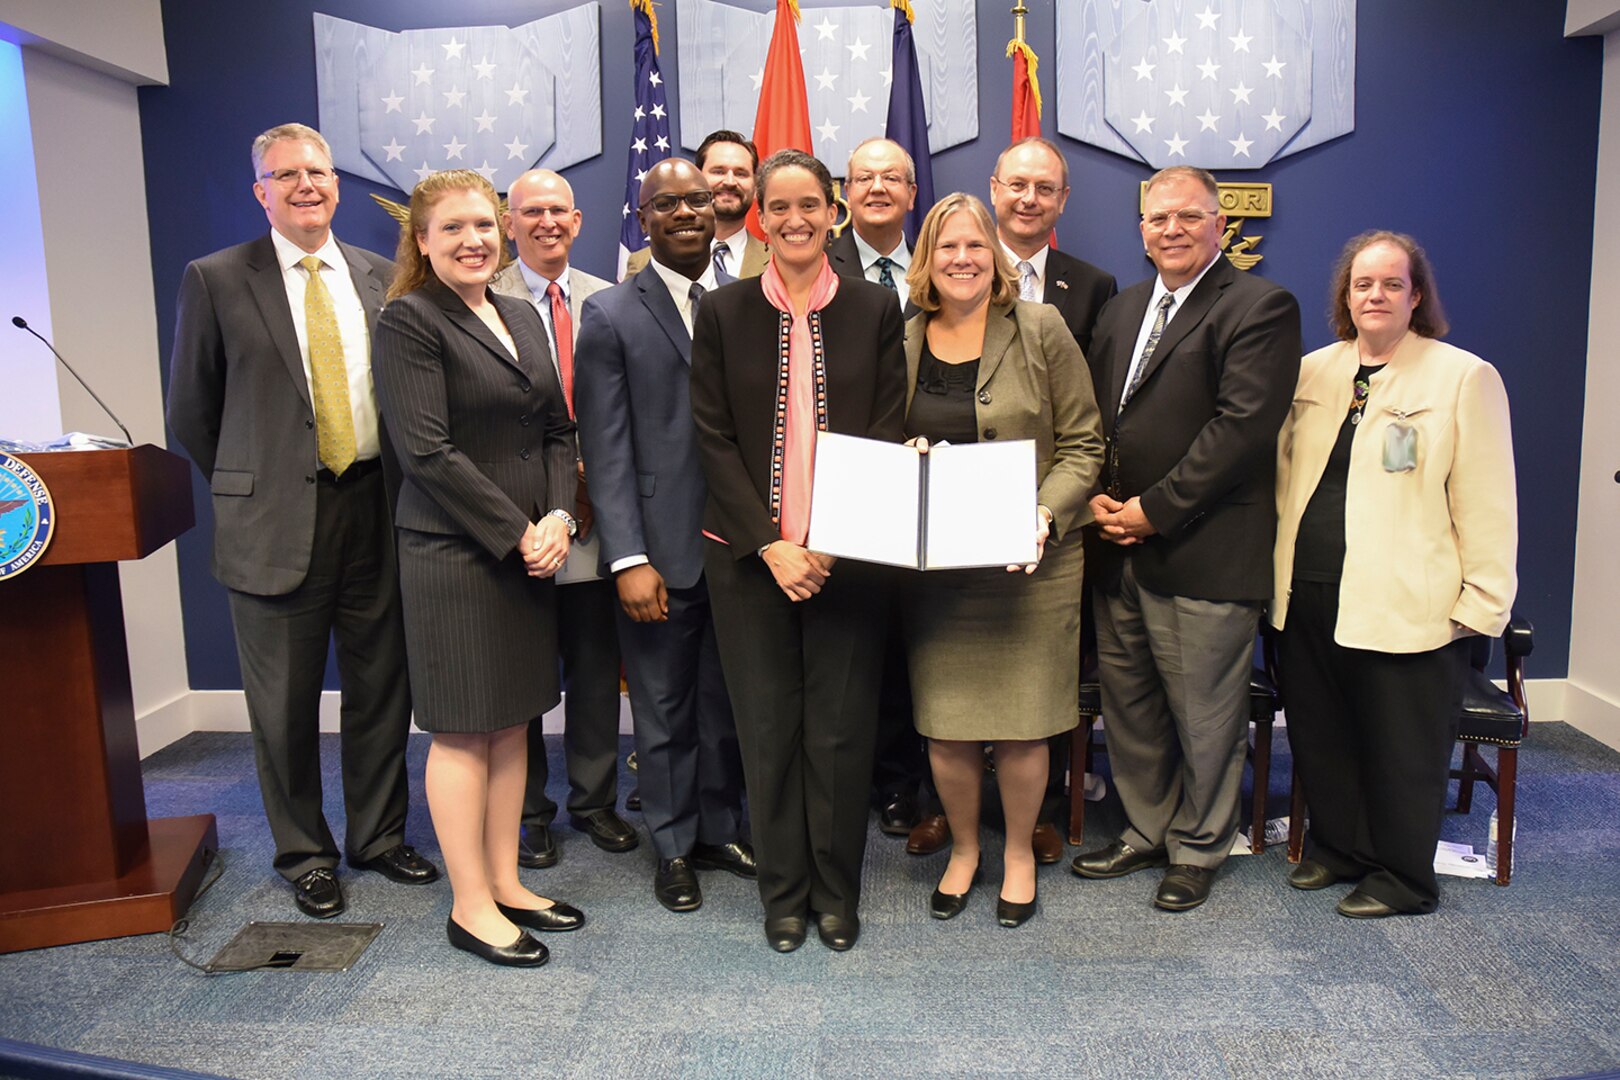 160801-N-RA705-001 WASHINGTON (Aug. 1, 2016) - Members of the AMNS-AF safety team receive the Secretary of the Navy Safety Excellence Award at the Pentagon. Pictured from left to right: Scott Tilden (Raytheon), Robyn Smith, Dave Chapman (Raytheon), Jarred Conley, Brandon Brown, Tracey Williams, Al Chester, Melissa Kirkendall, Phil Harrison (BAE), Andy Fuller, and Karen Cooper. 